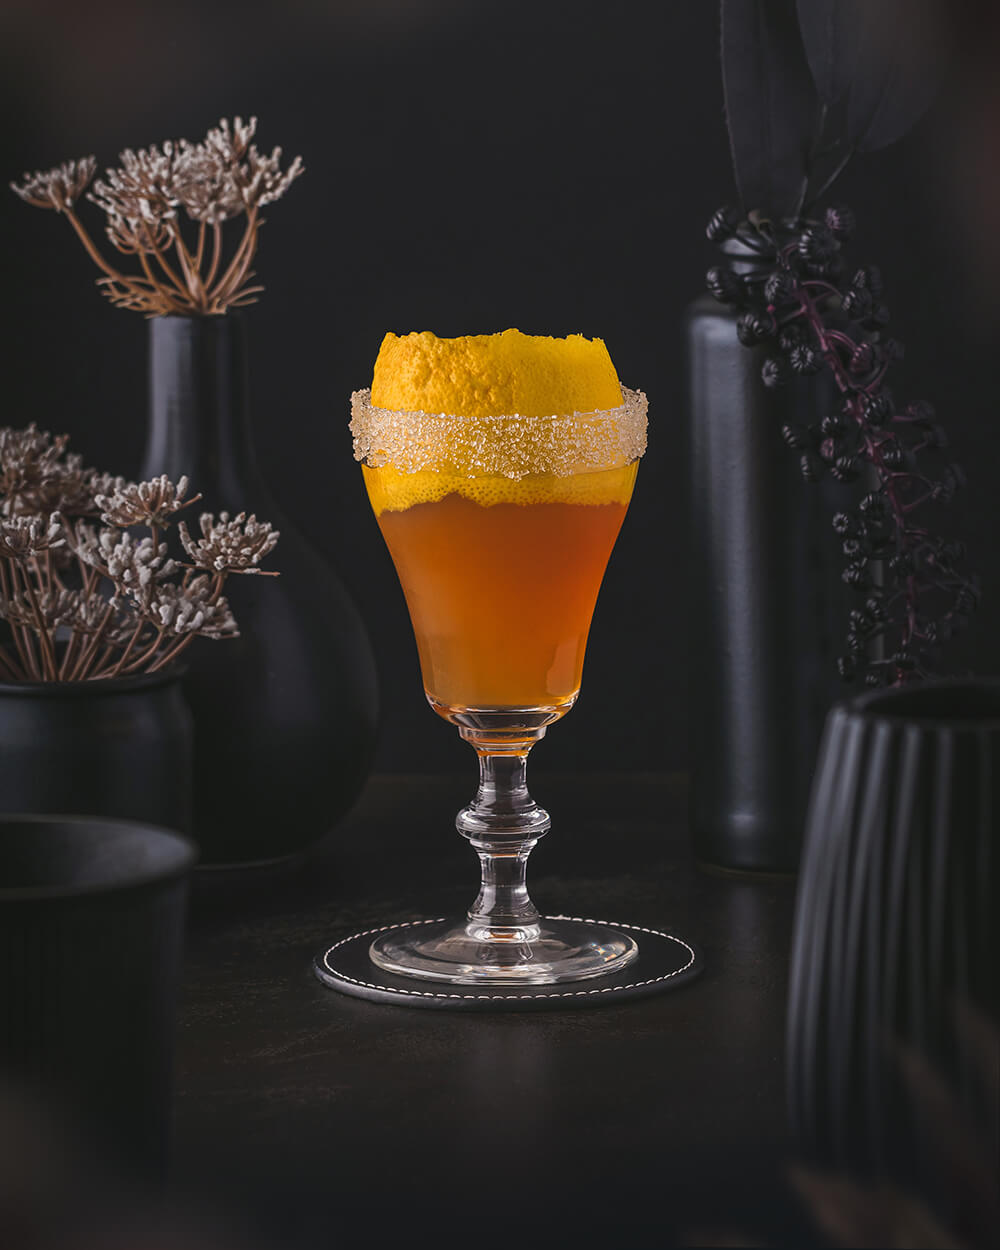 Brandy Crusta - Classic orange brown cocktail made with cognac, dry curaçao, maraschino, lemon juice, sugar cane syrup and angostura bitters, with a sugar rim and a large lemon zest as garnish.